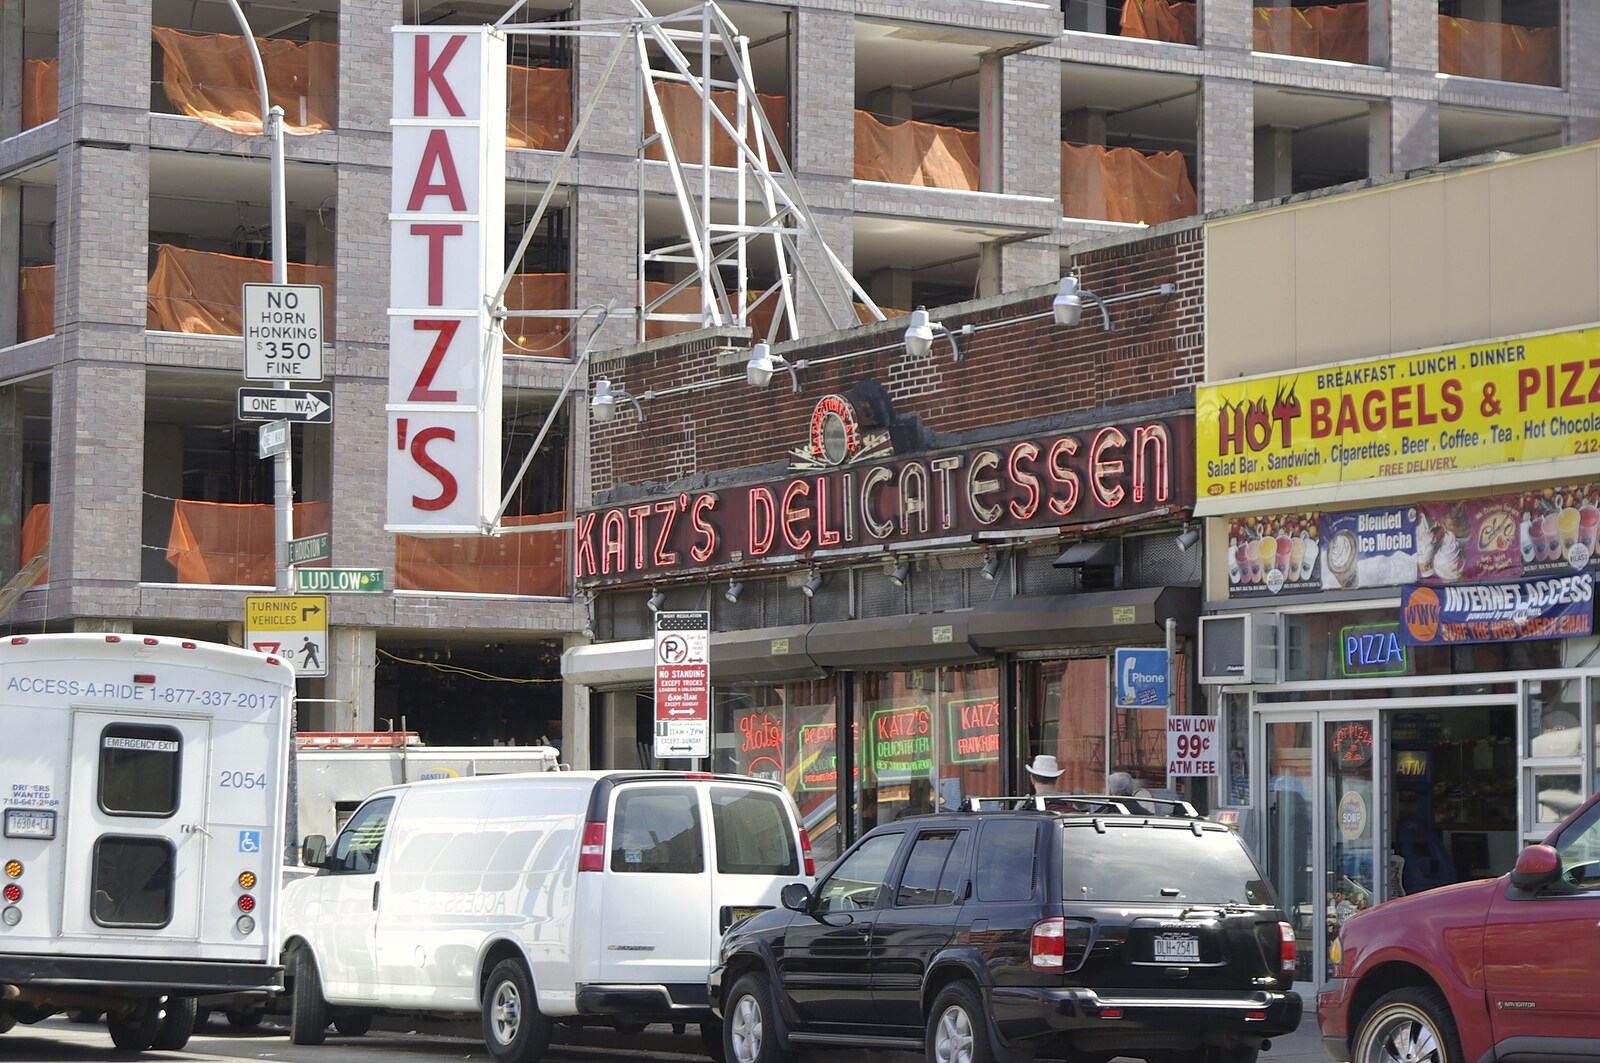 Liberty Island, A Helicopter Trip and Madison Square Basketball, New York, US - 27th March 2007: Katz's Deli